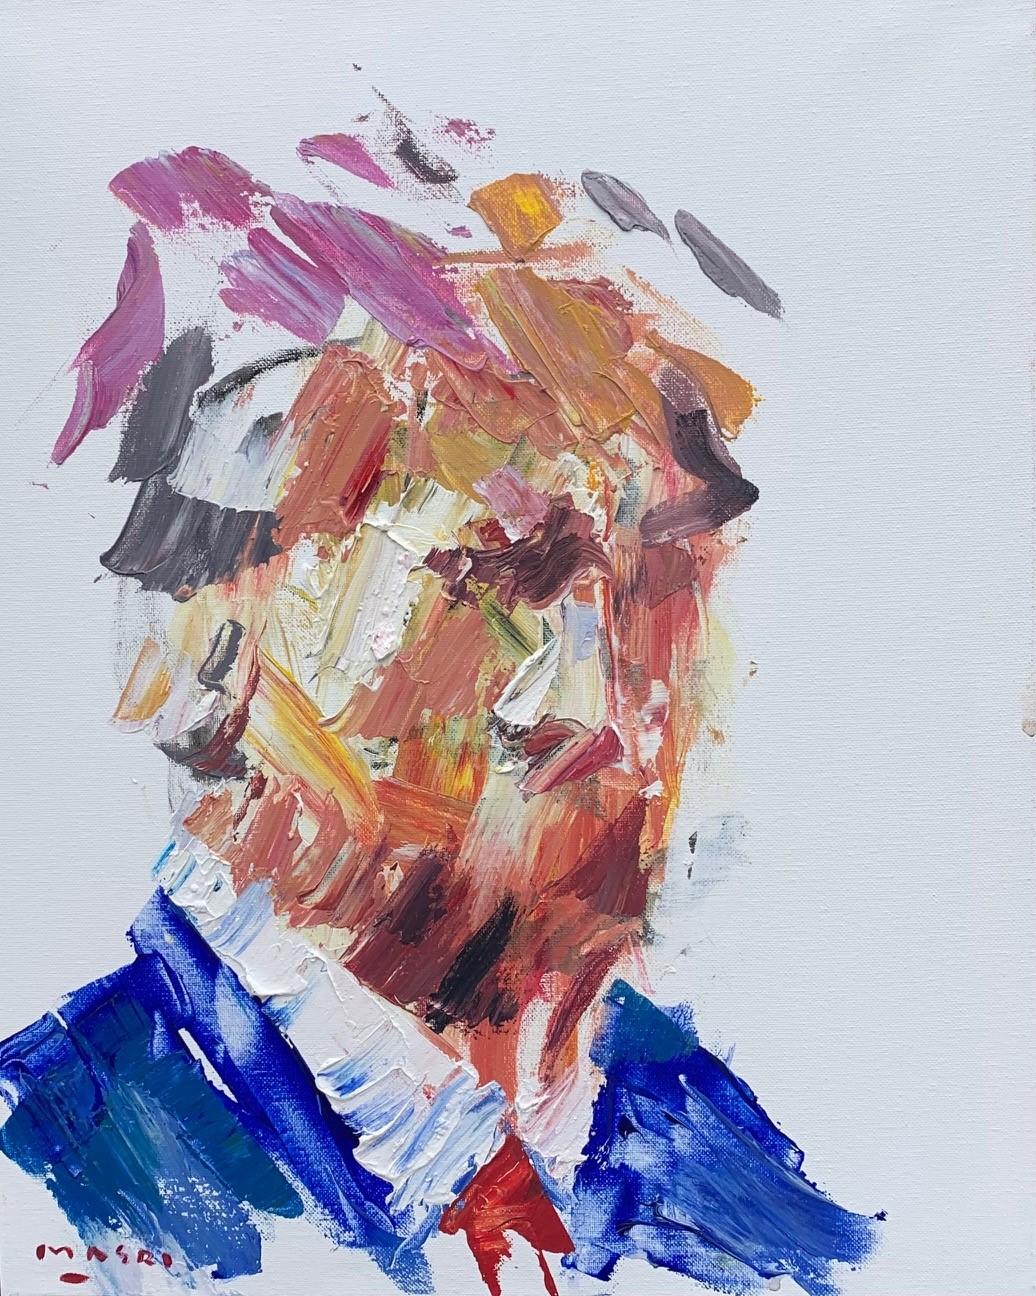 Masri Hayssam Figurative Painting - "The President" Oil on Canvas 16"x20" by Masri